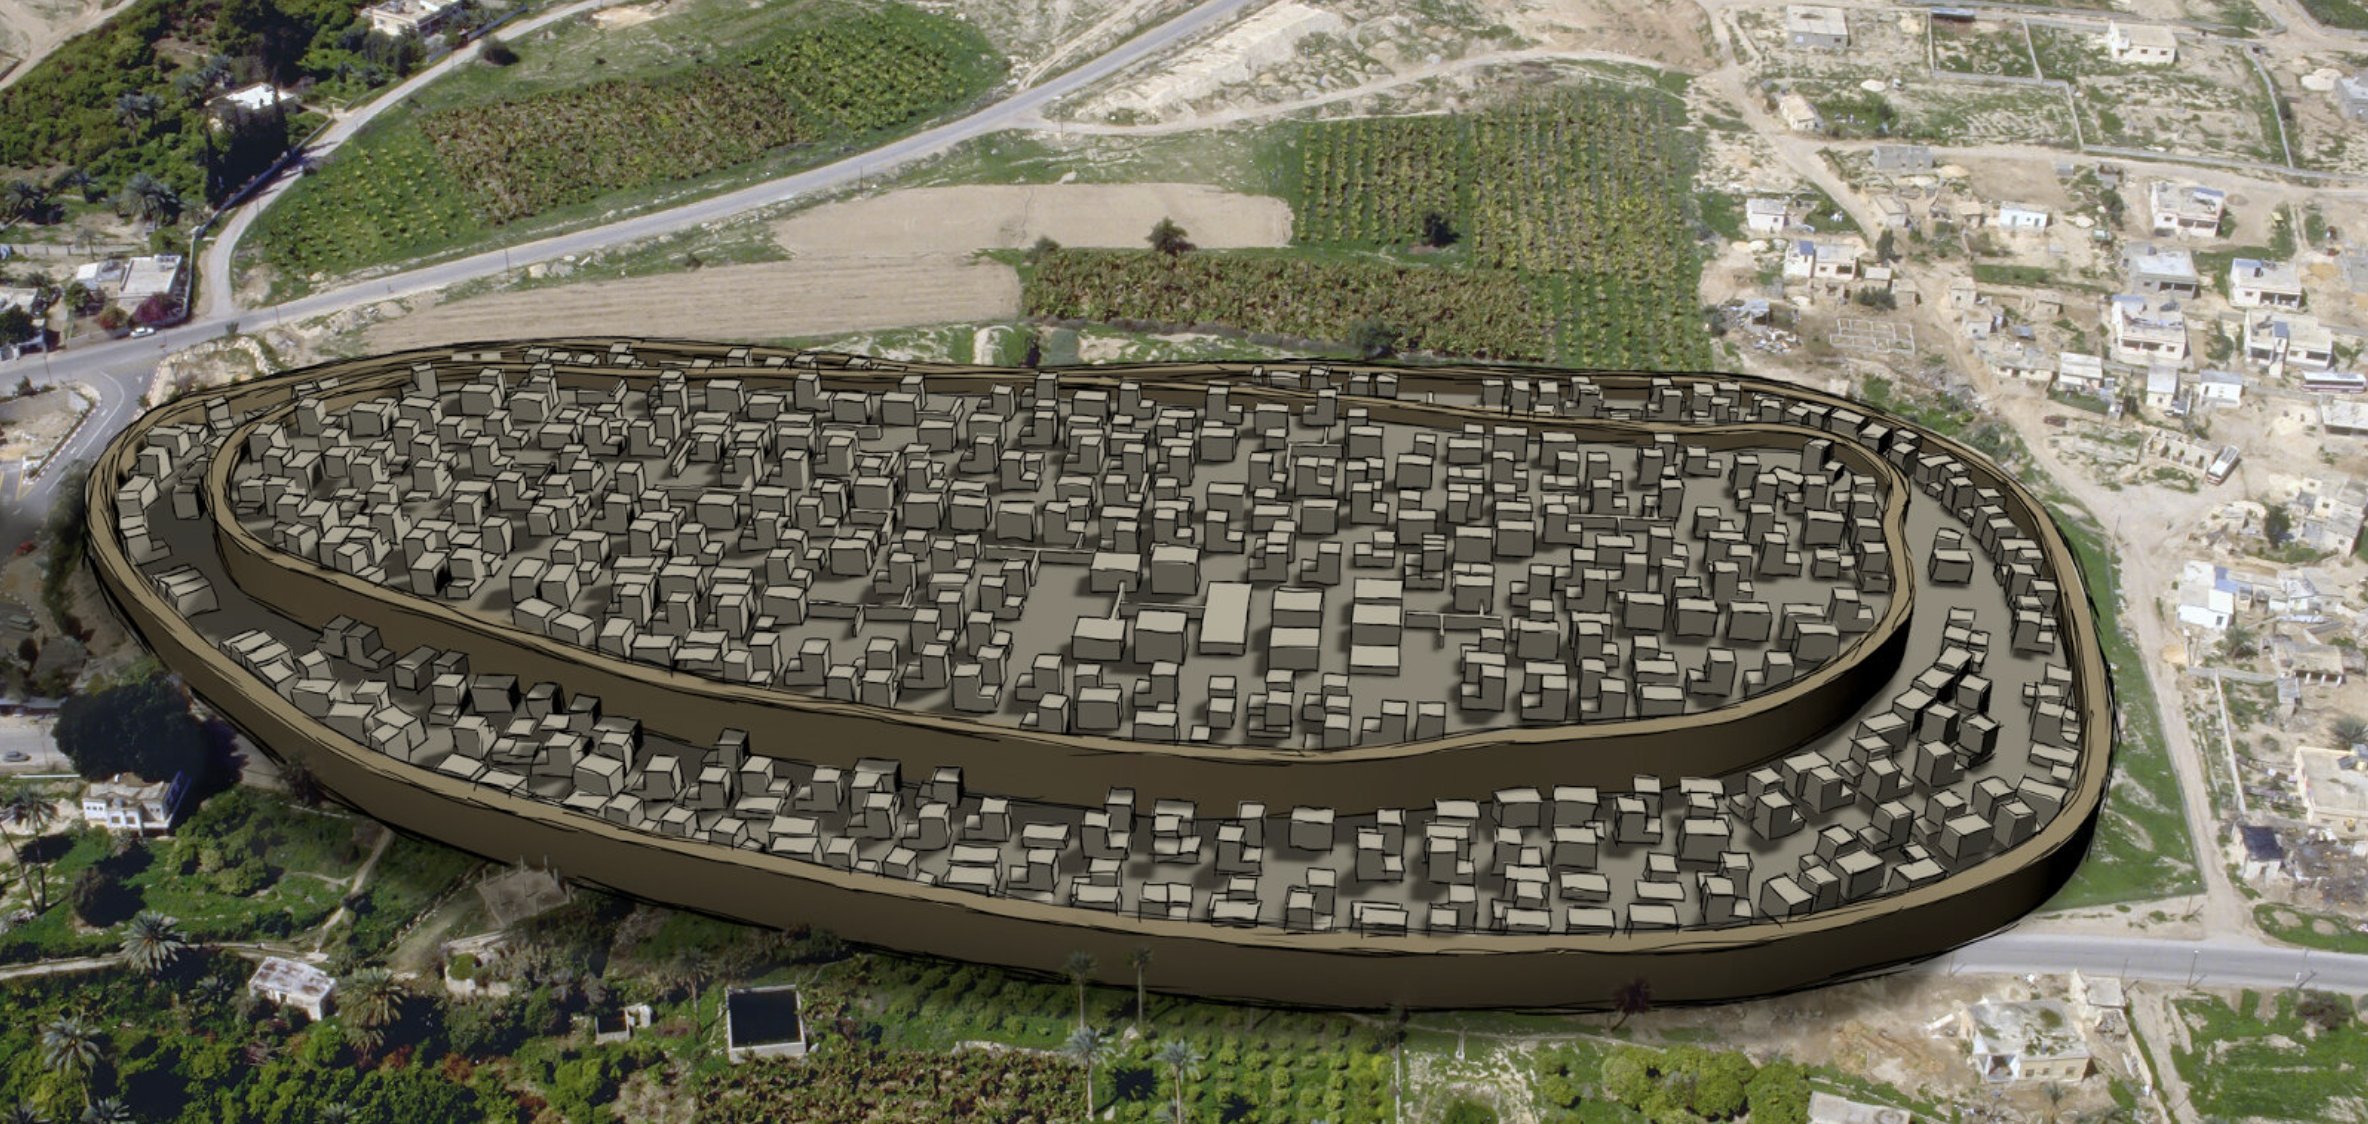 A 3D reconstruction of the ancient city of Jericho.